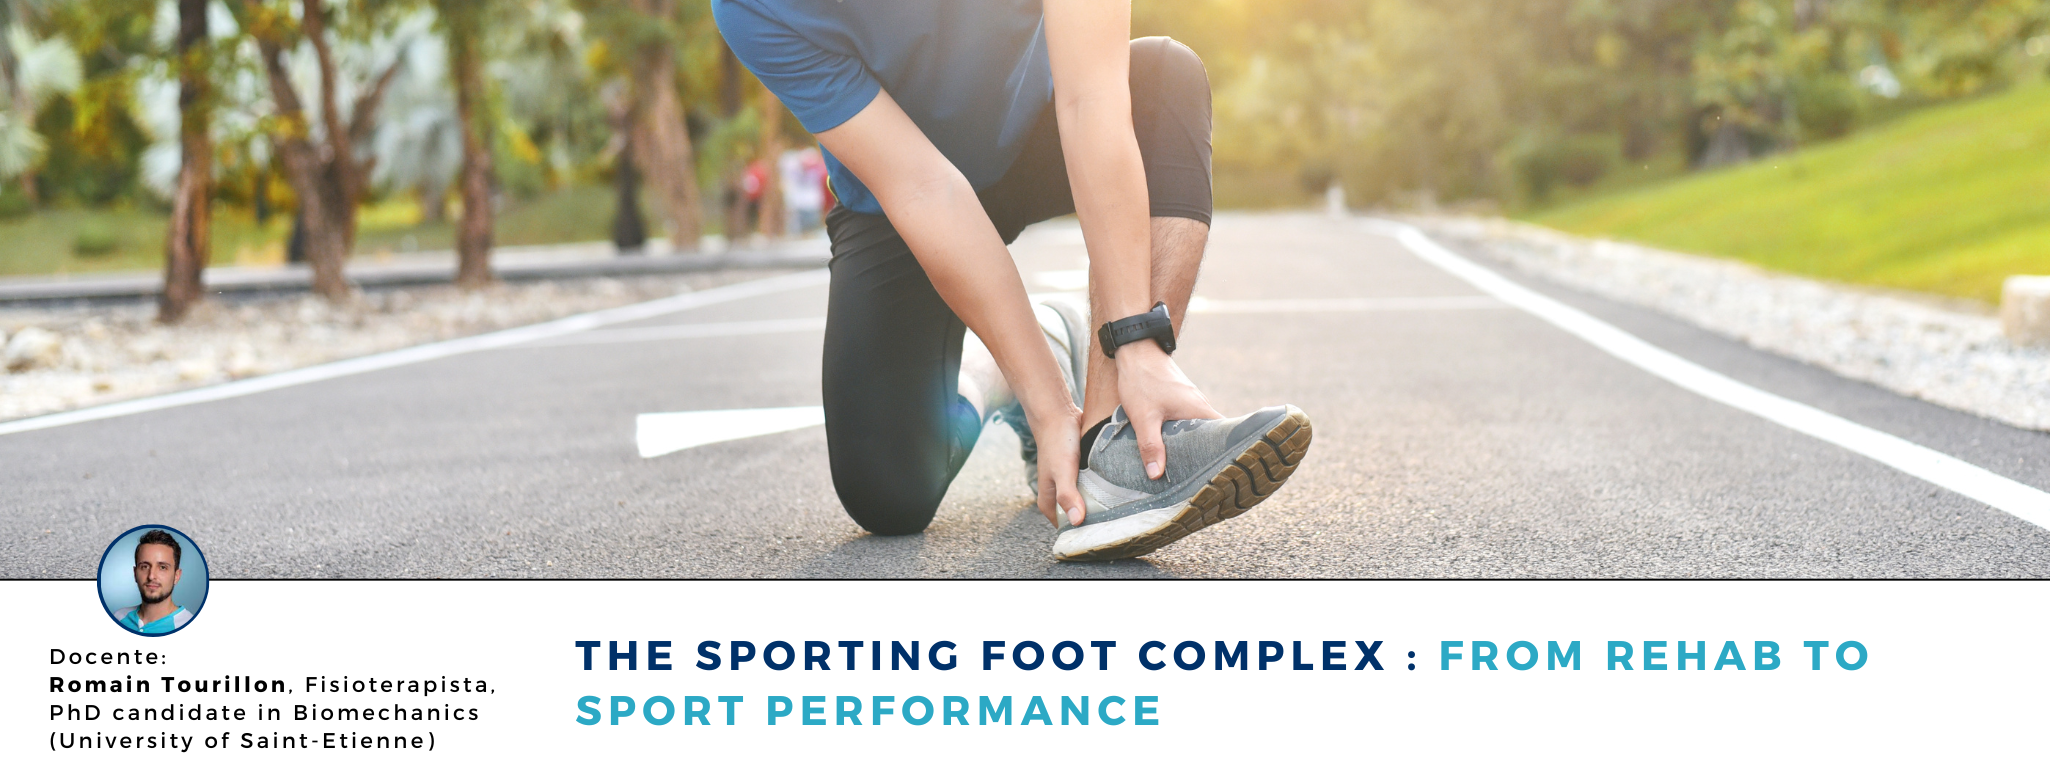 THE SPORTING FOOT COMPLEX : FROM REHAB TO SPORT PERFORMANCE